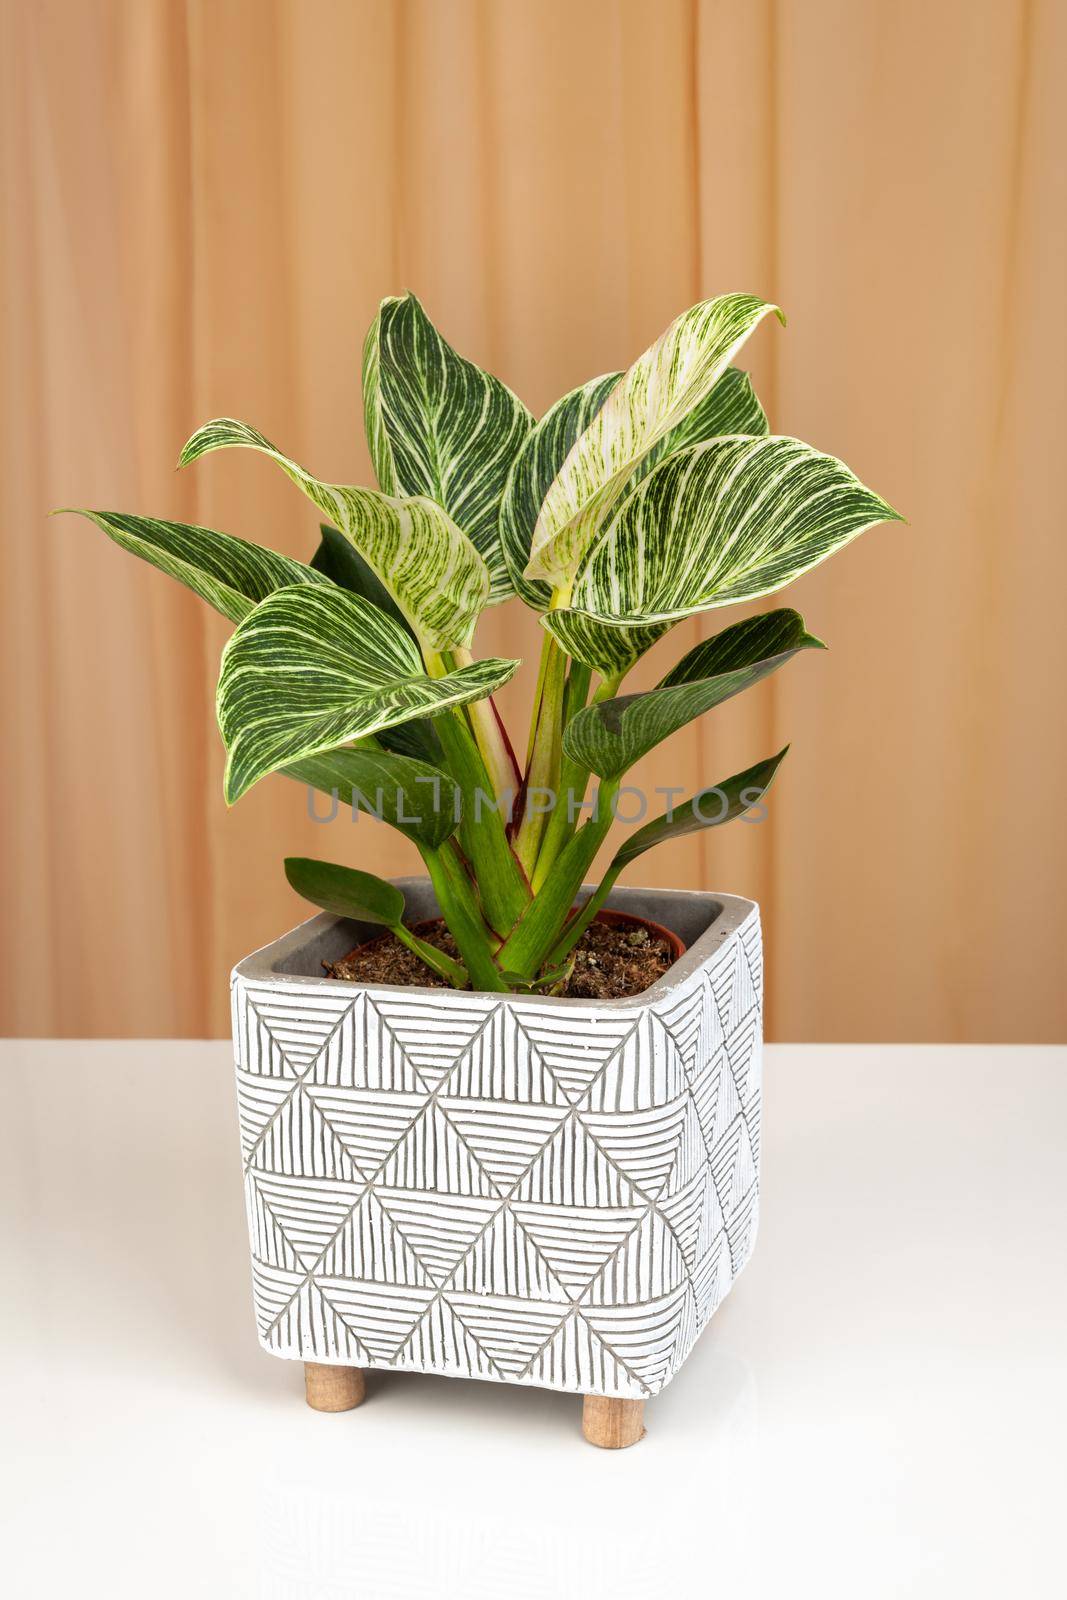 Philodendron Birkin house plant in white textured pot by igor_stramyk